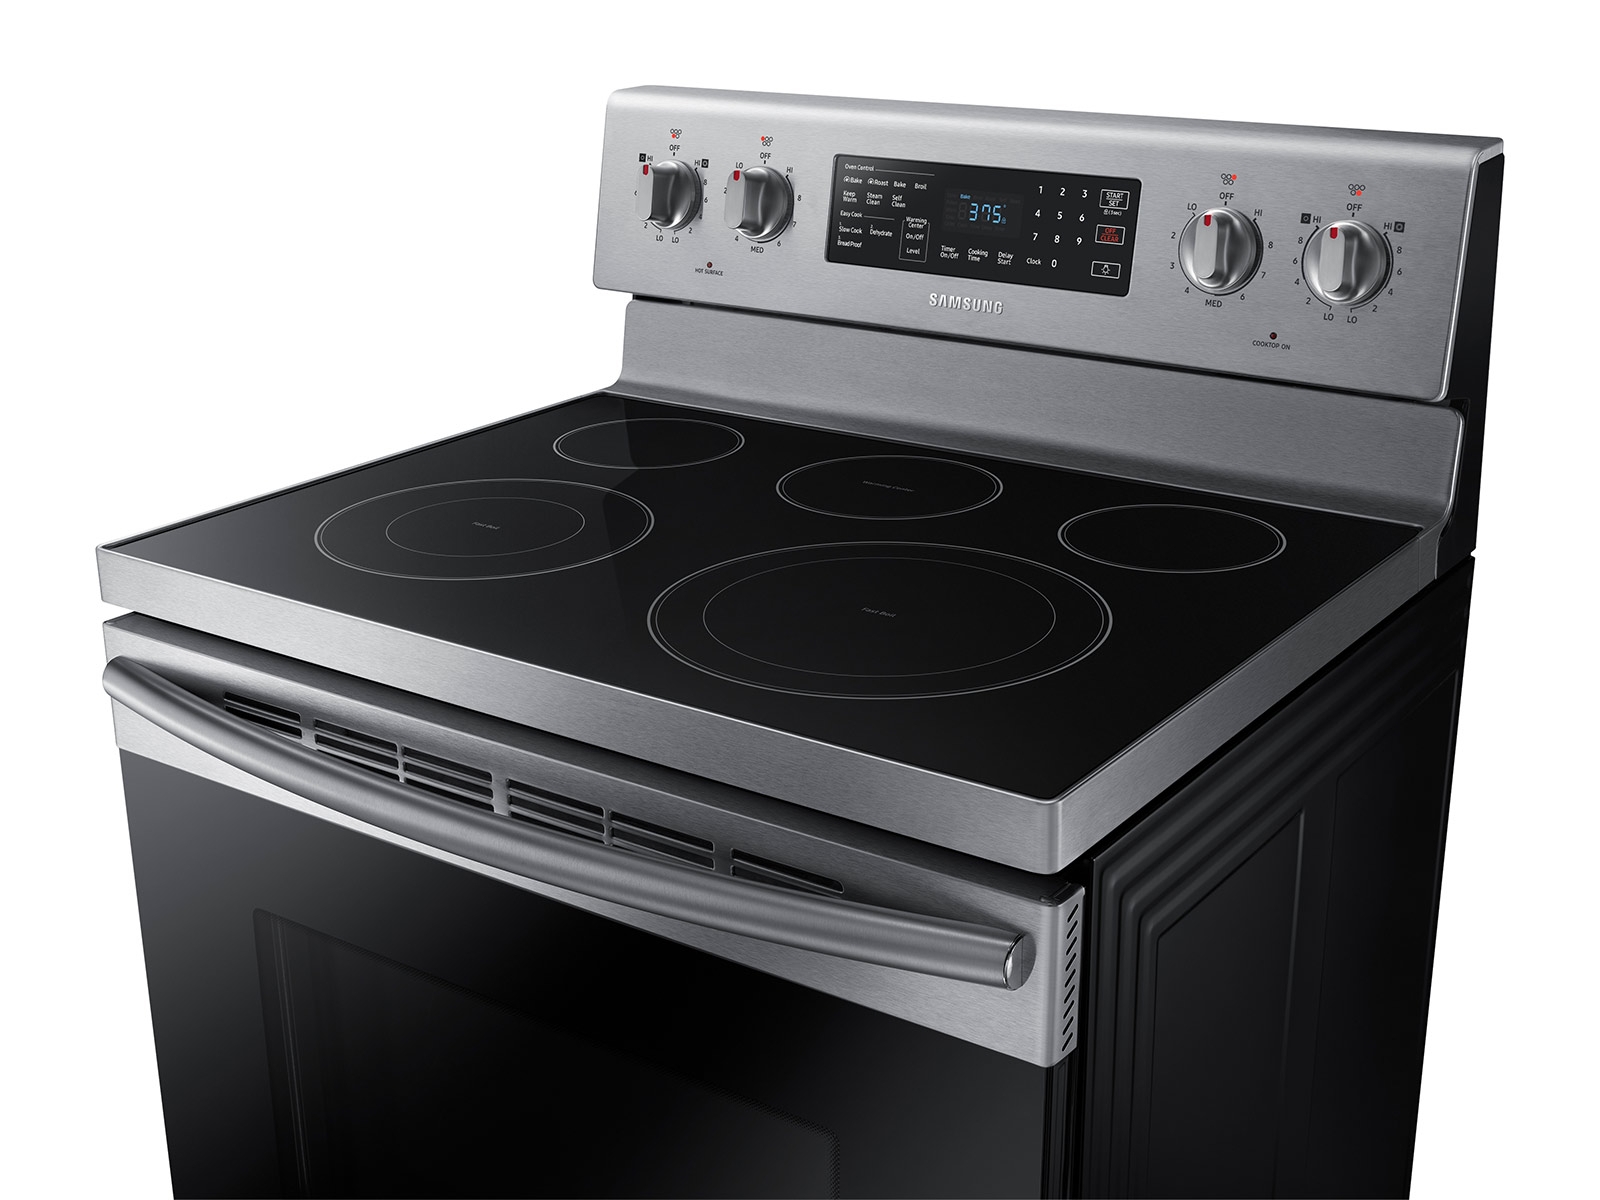 Thumbnail image of 5.9 cu. ft. Freestanding Electric Range with Convection in Stainless Steel